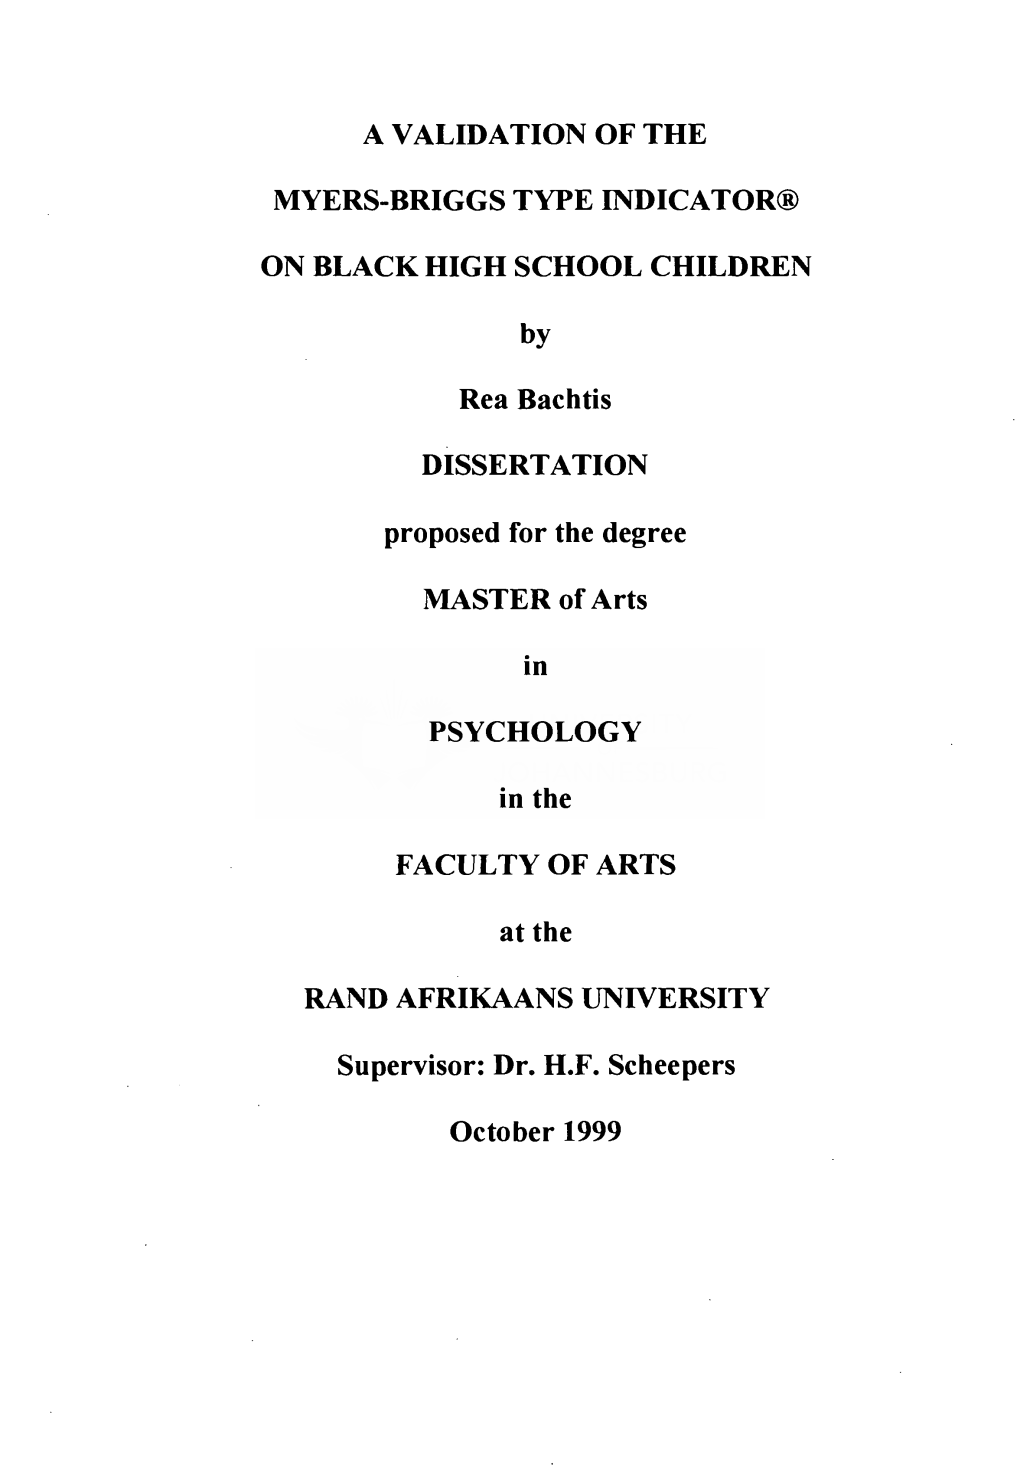 A Validation of the Myers-Briggs Type Indicator on Black High School Children